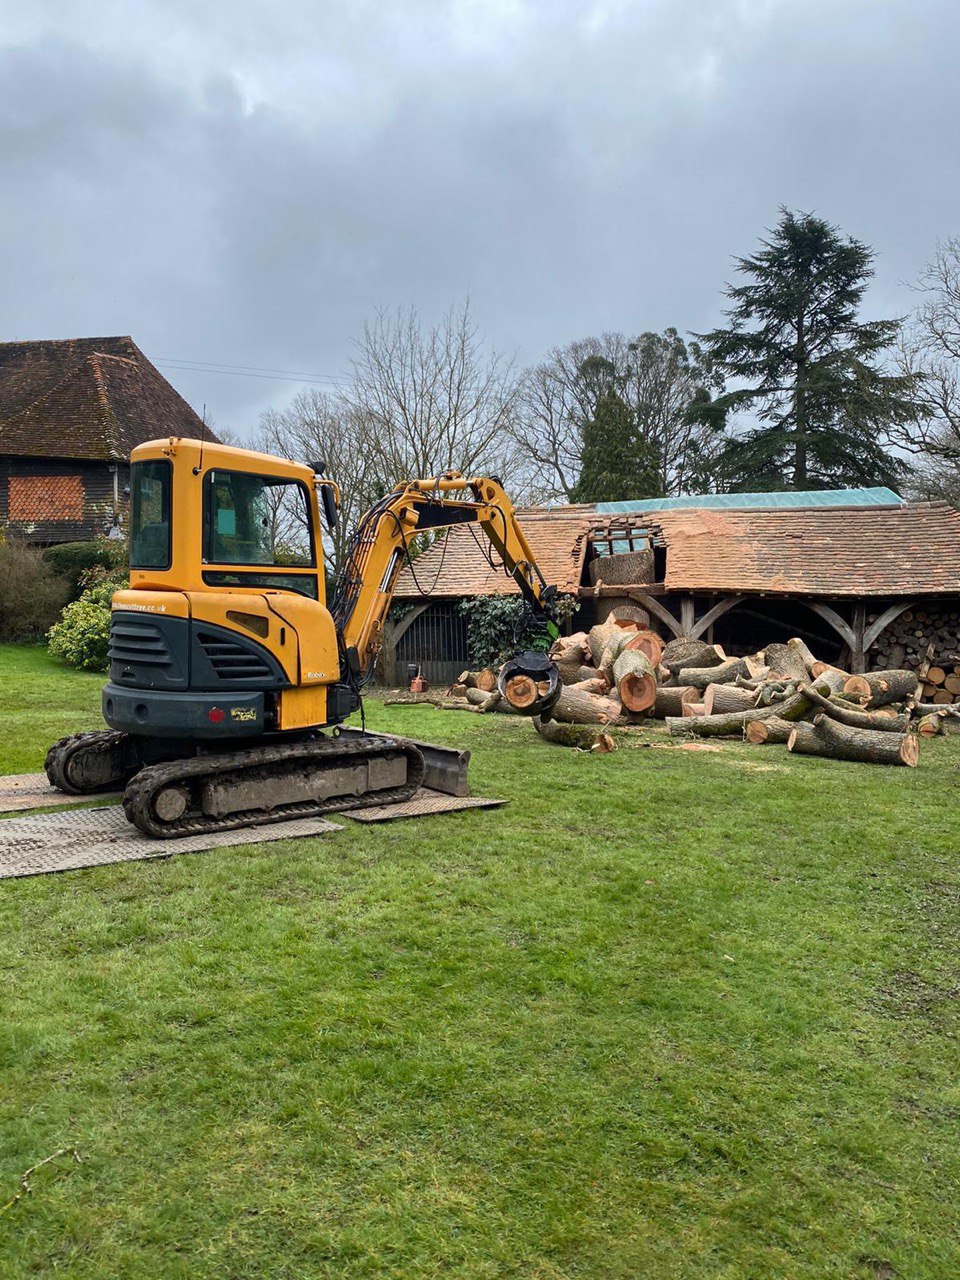 This is a photo of tree felling being carried out in Sevenoaks. All works are being undertaken by Sevenoaks Tree Surgeons